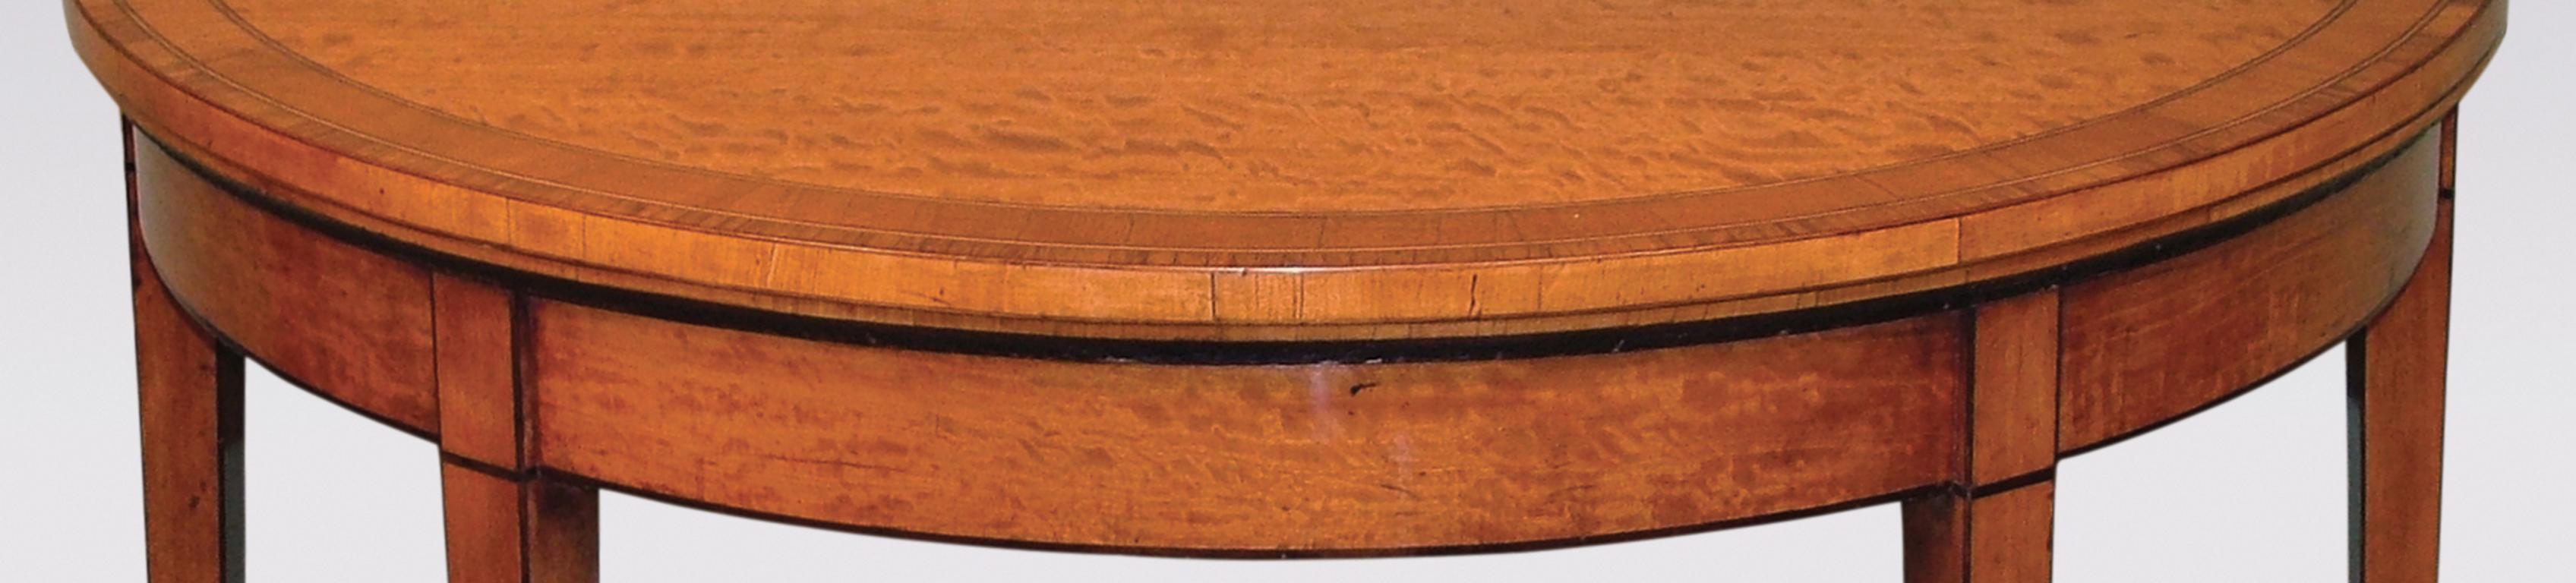 English 18th Century Sheraton Period Satinwood Card Table For Sale